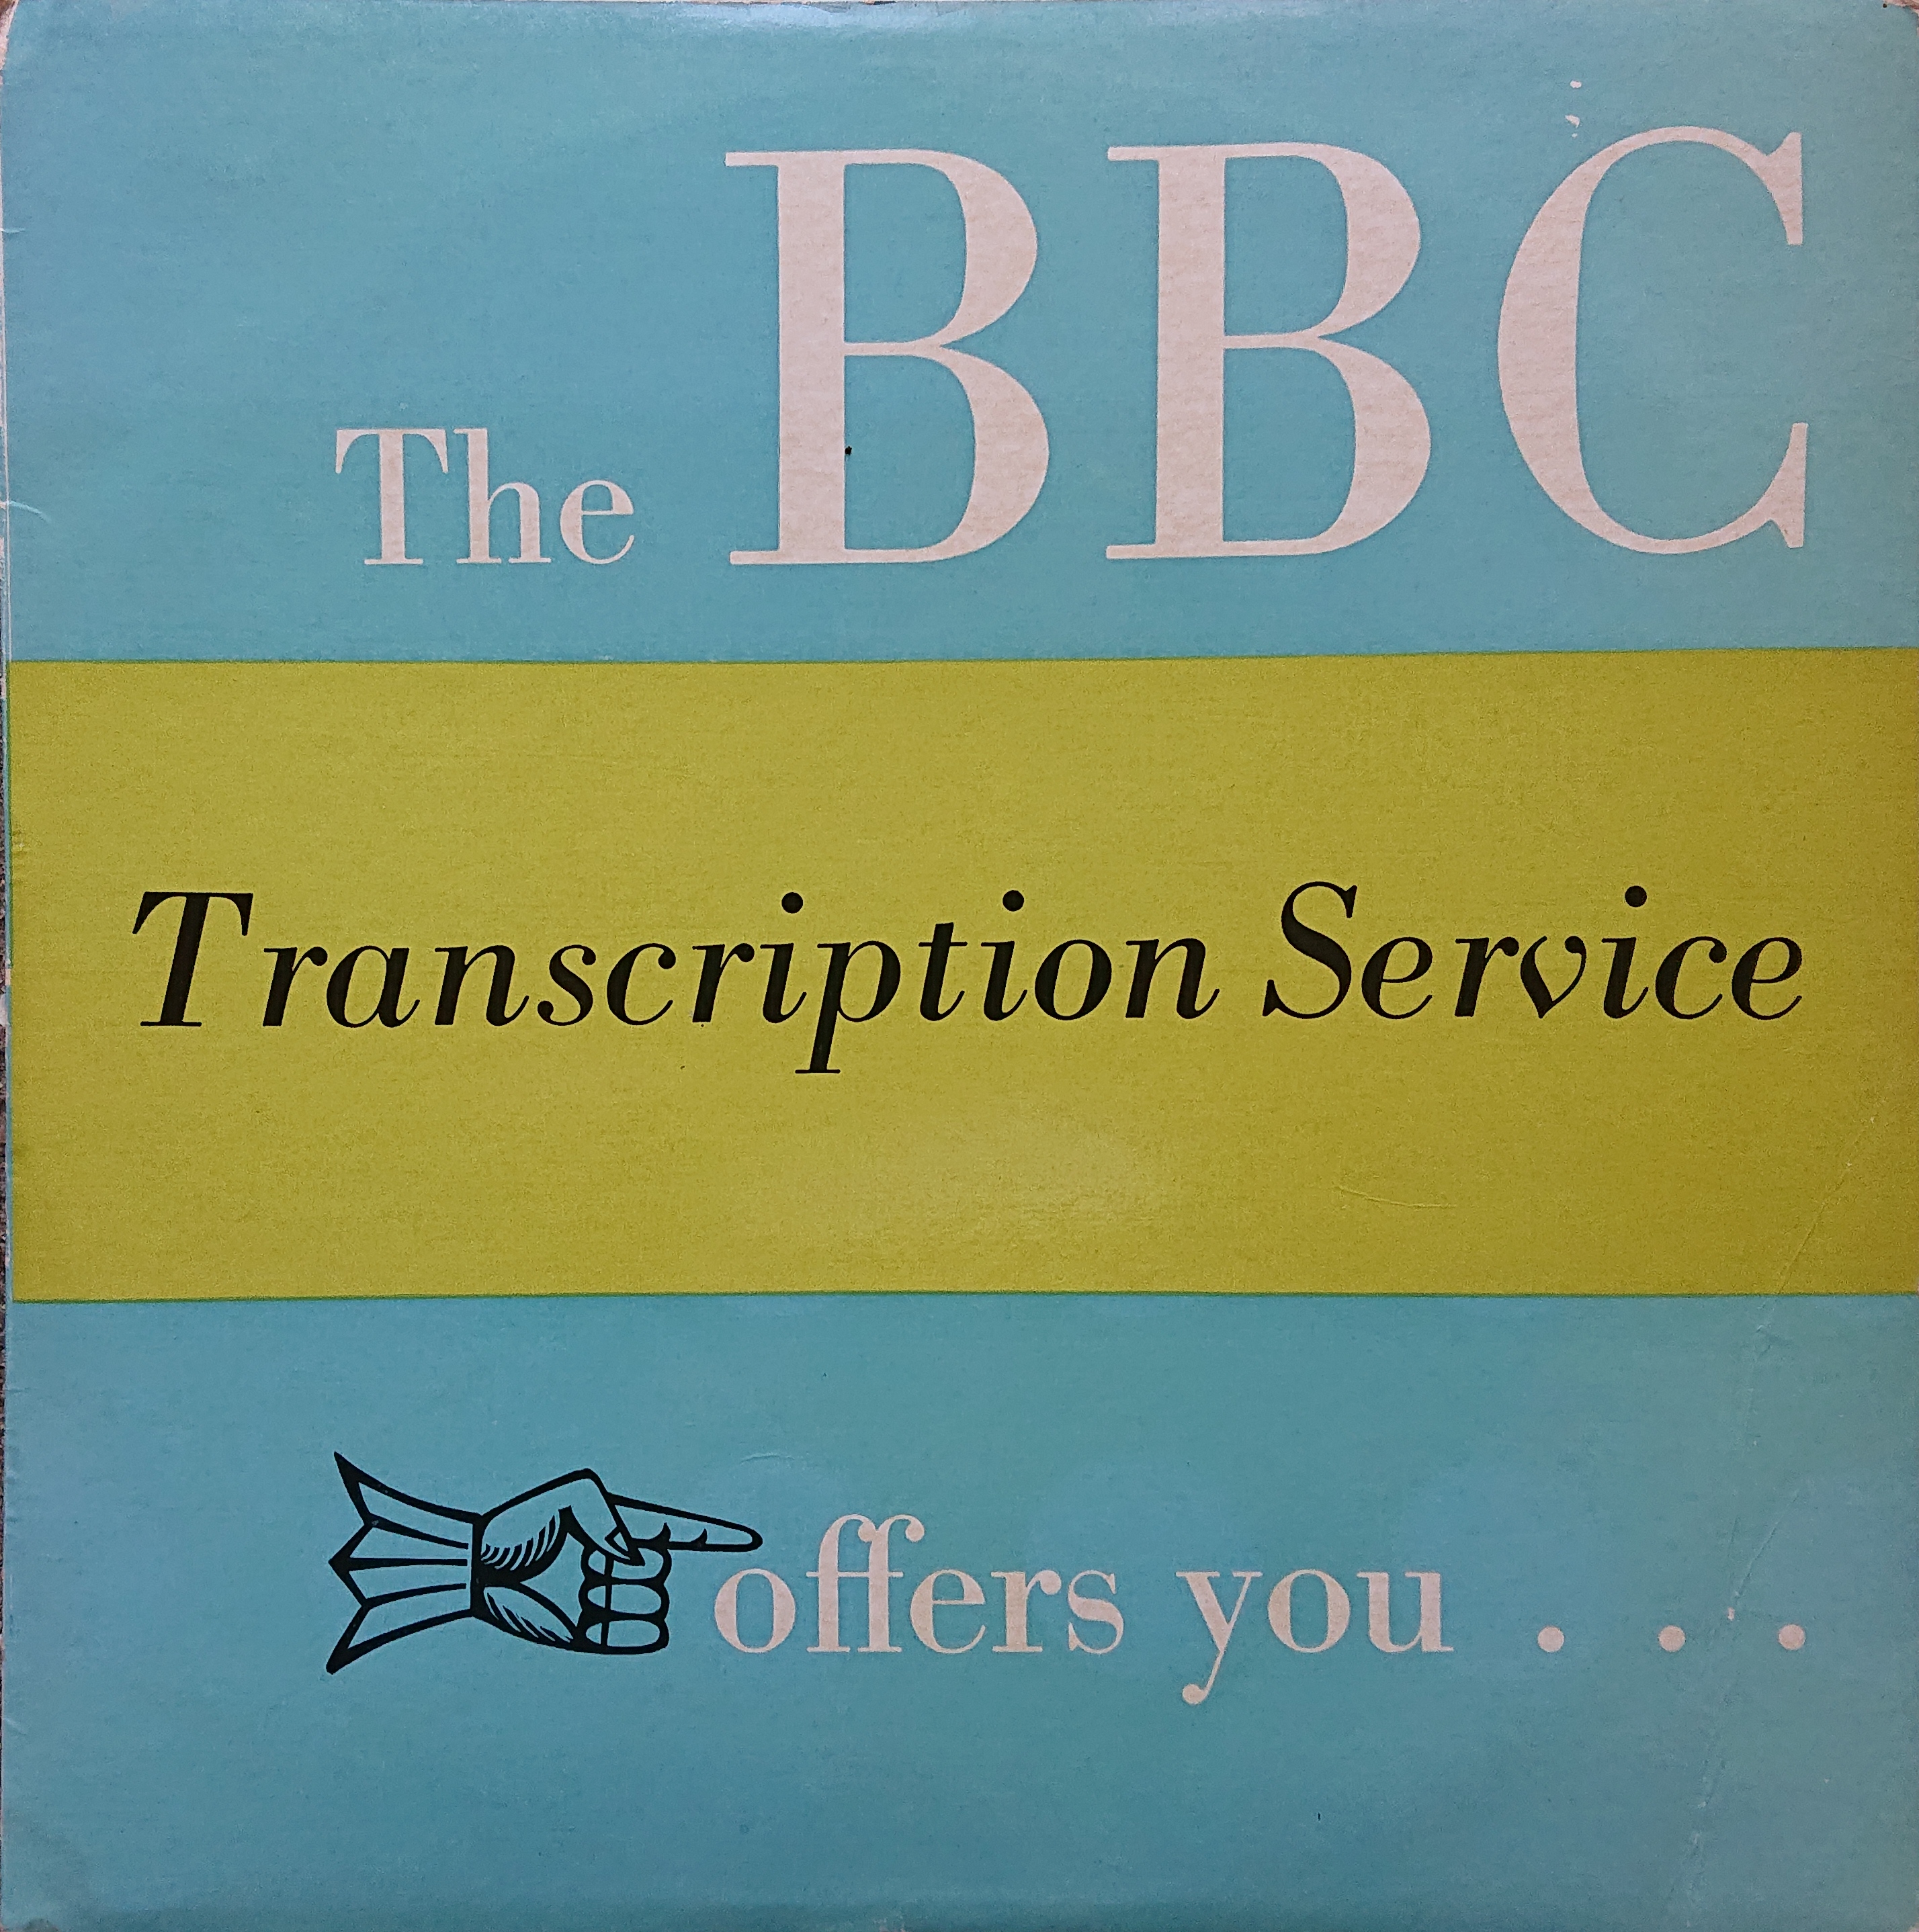 Picture of 100409 The BBC Transcription Service offers you ... by artist Various from the BBC albums - Records and Tapes library